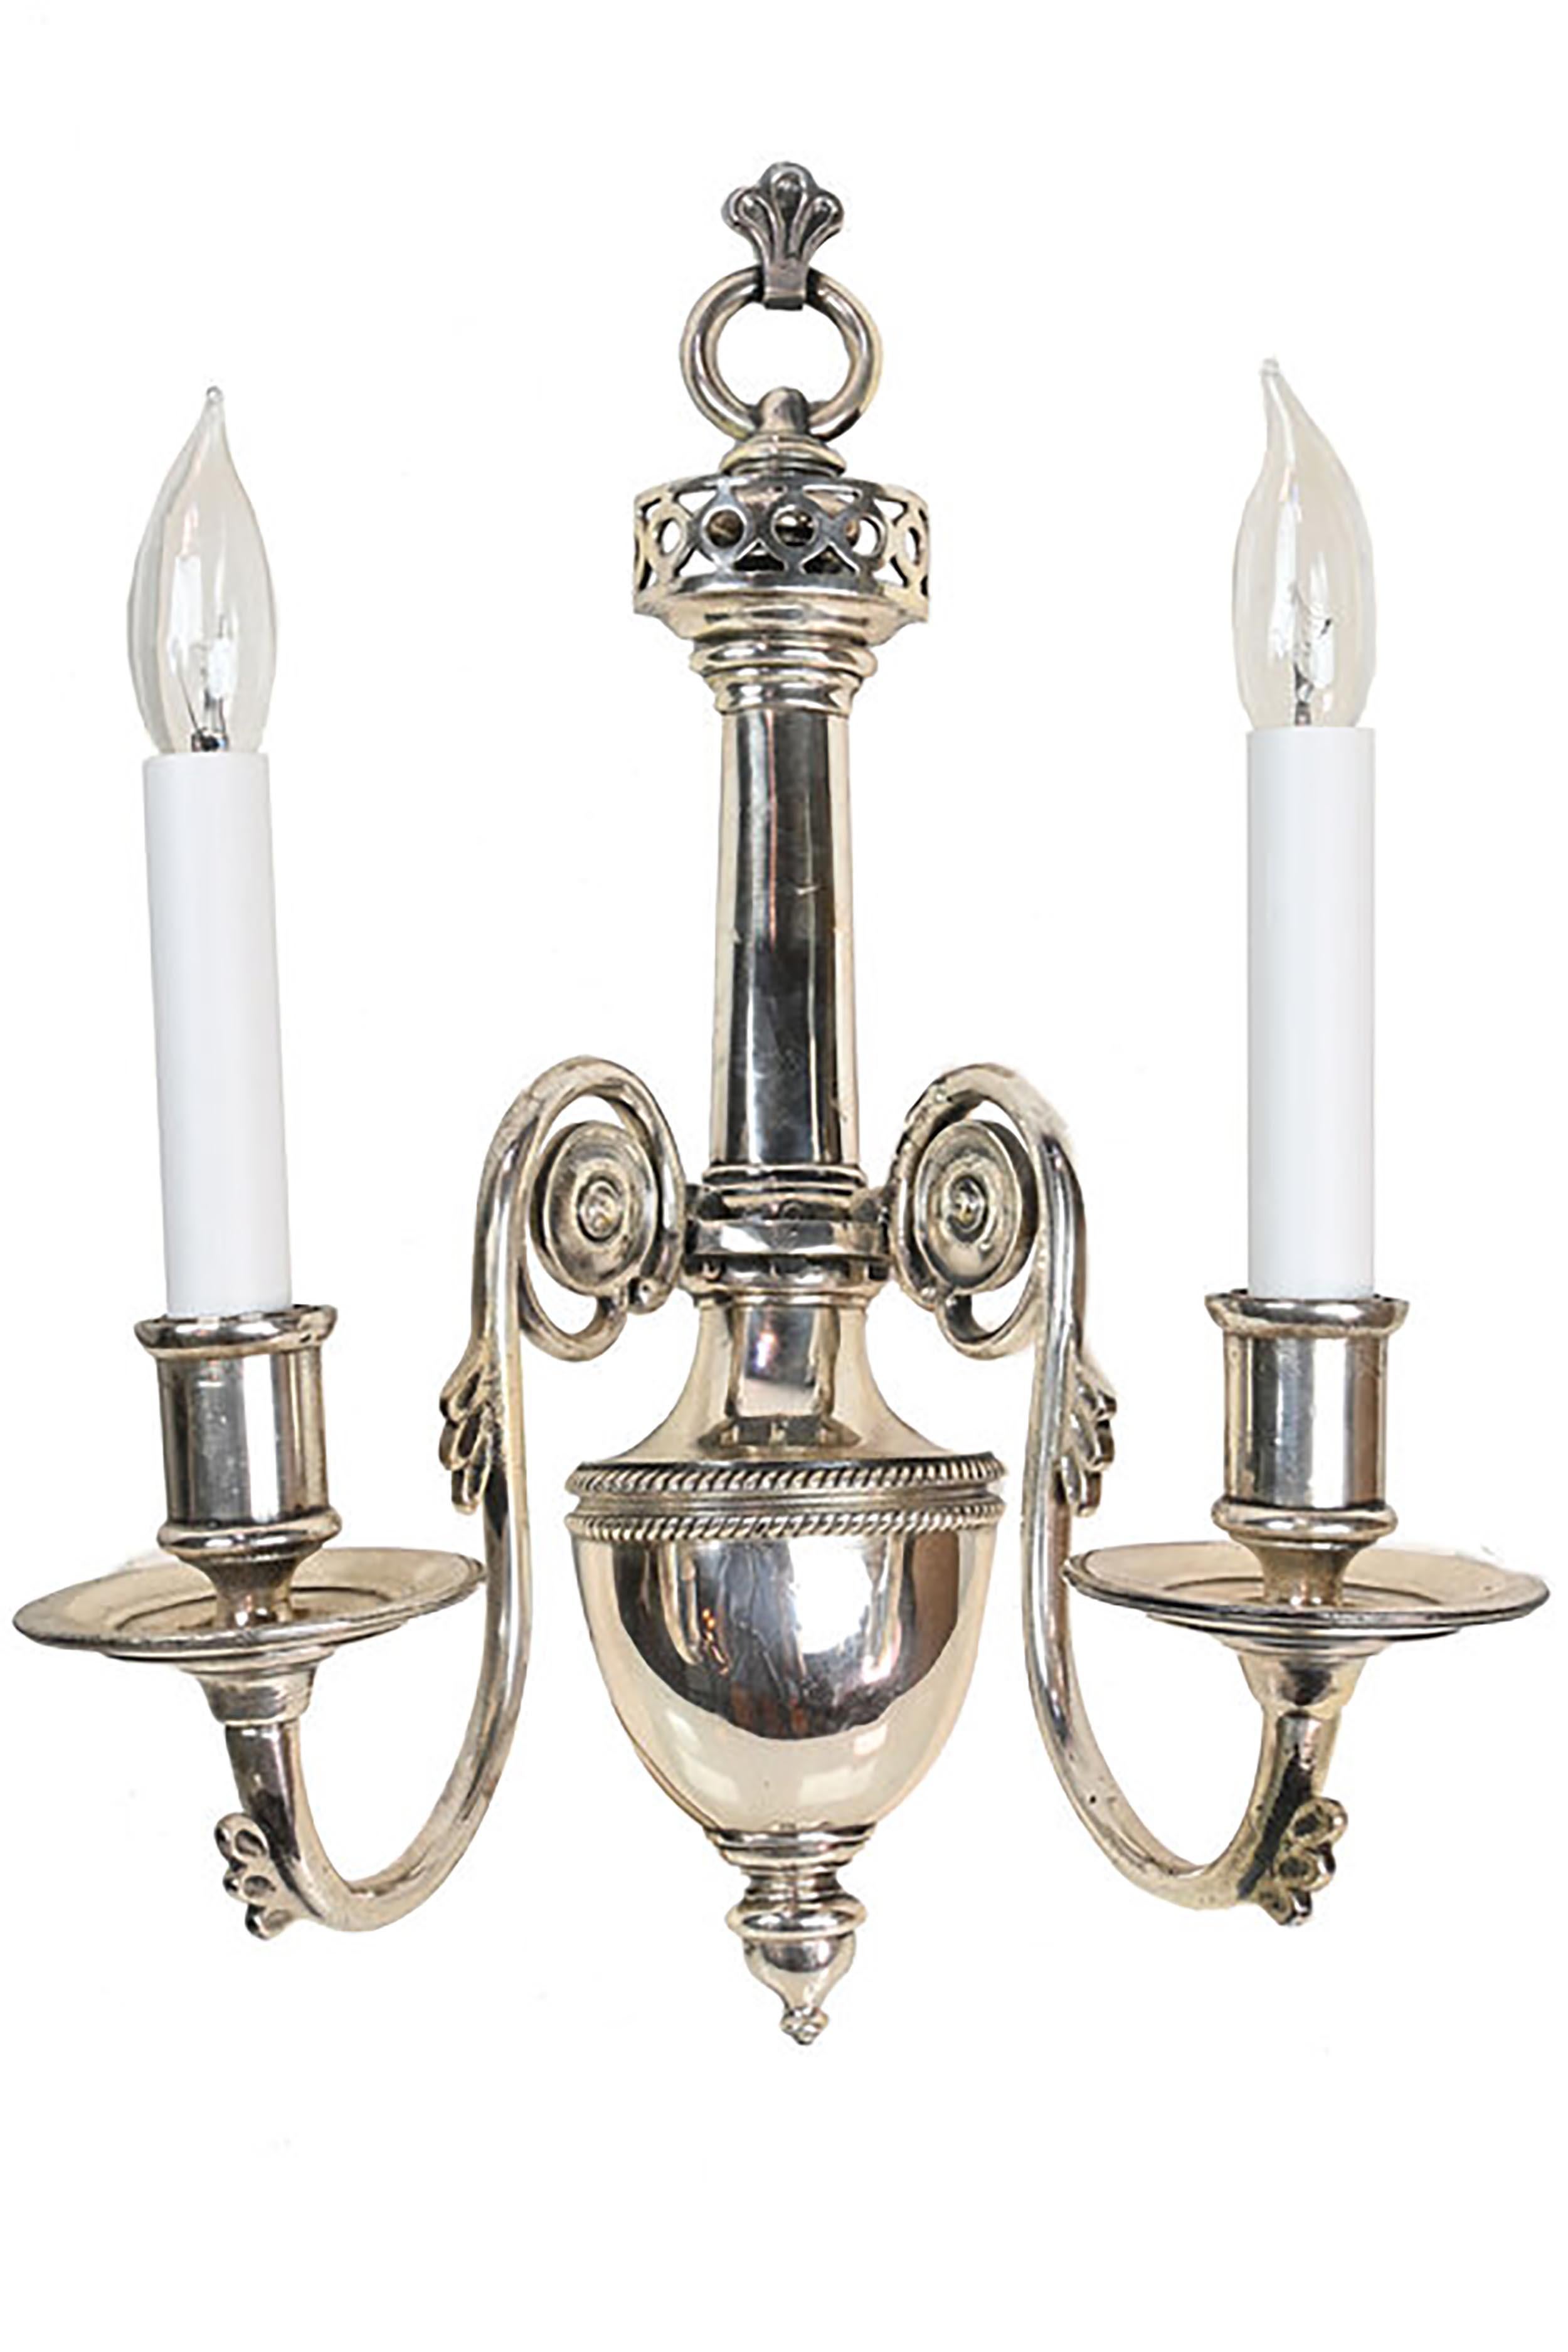 Caldwell Early 20th C. Silver 3 Candle Wall Sconces 4